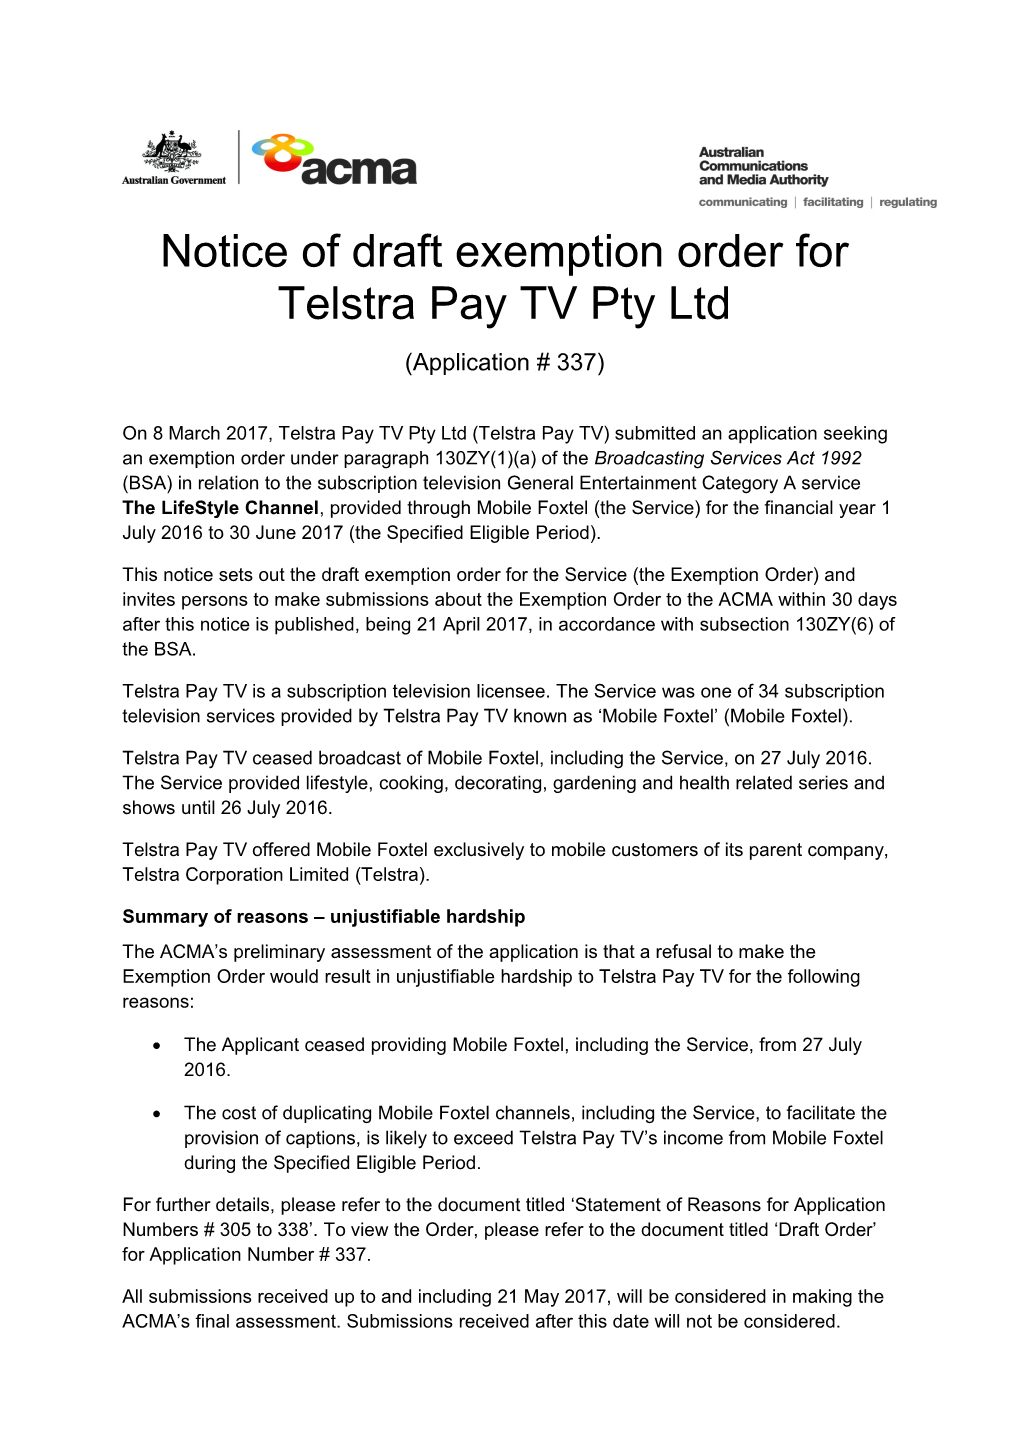 Notice of Draft Exemption Order for Telstra Pay TV Pty Ltd